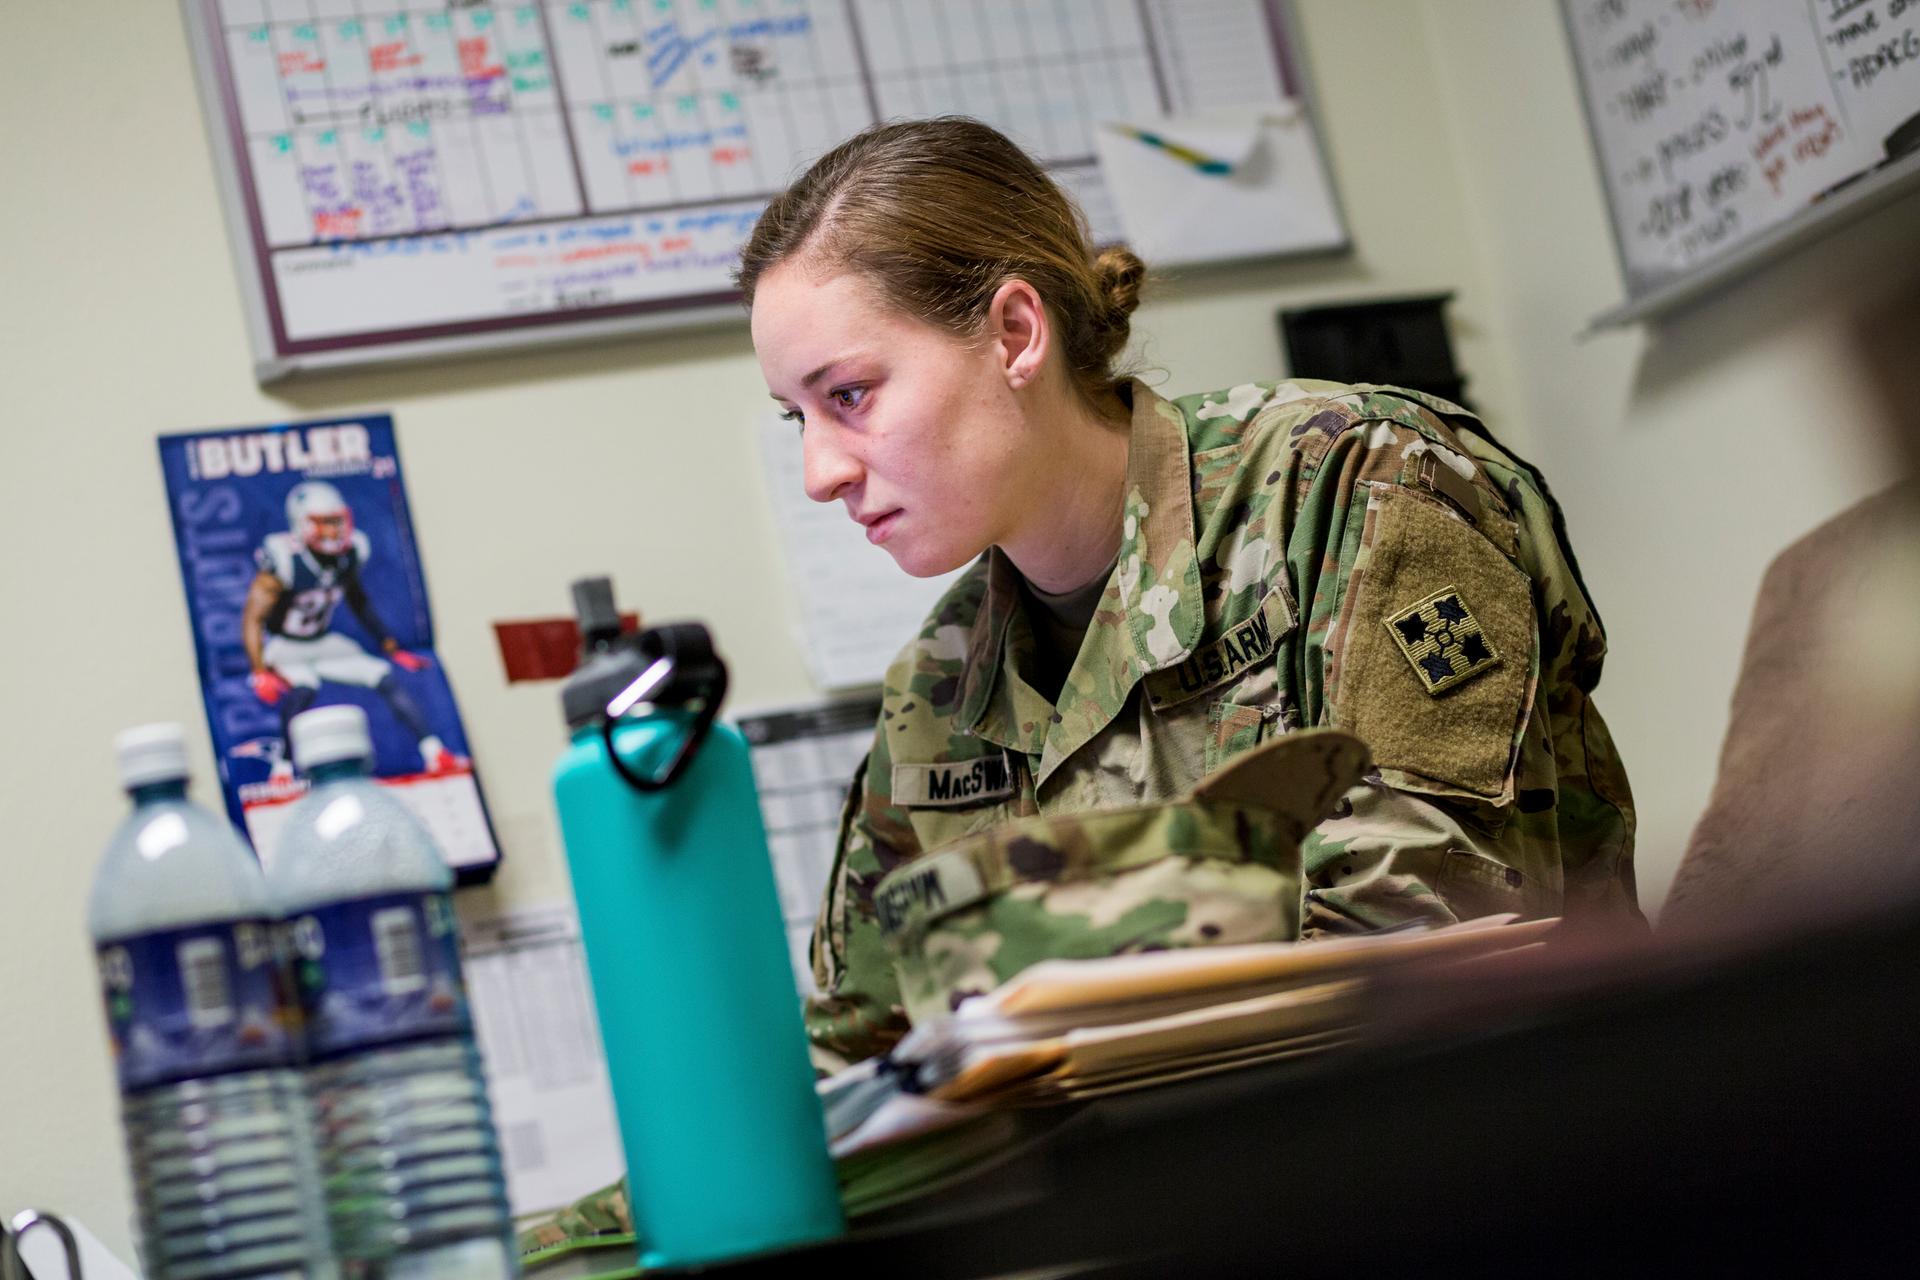 First Lieutenant Erica MacSwan at her office at Fort Carson Army base in Colorado Springs, Colorado.